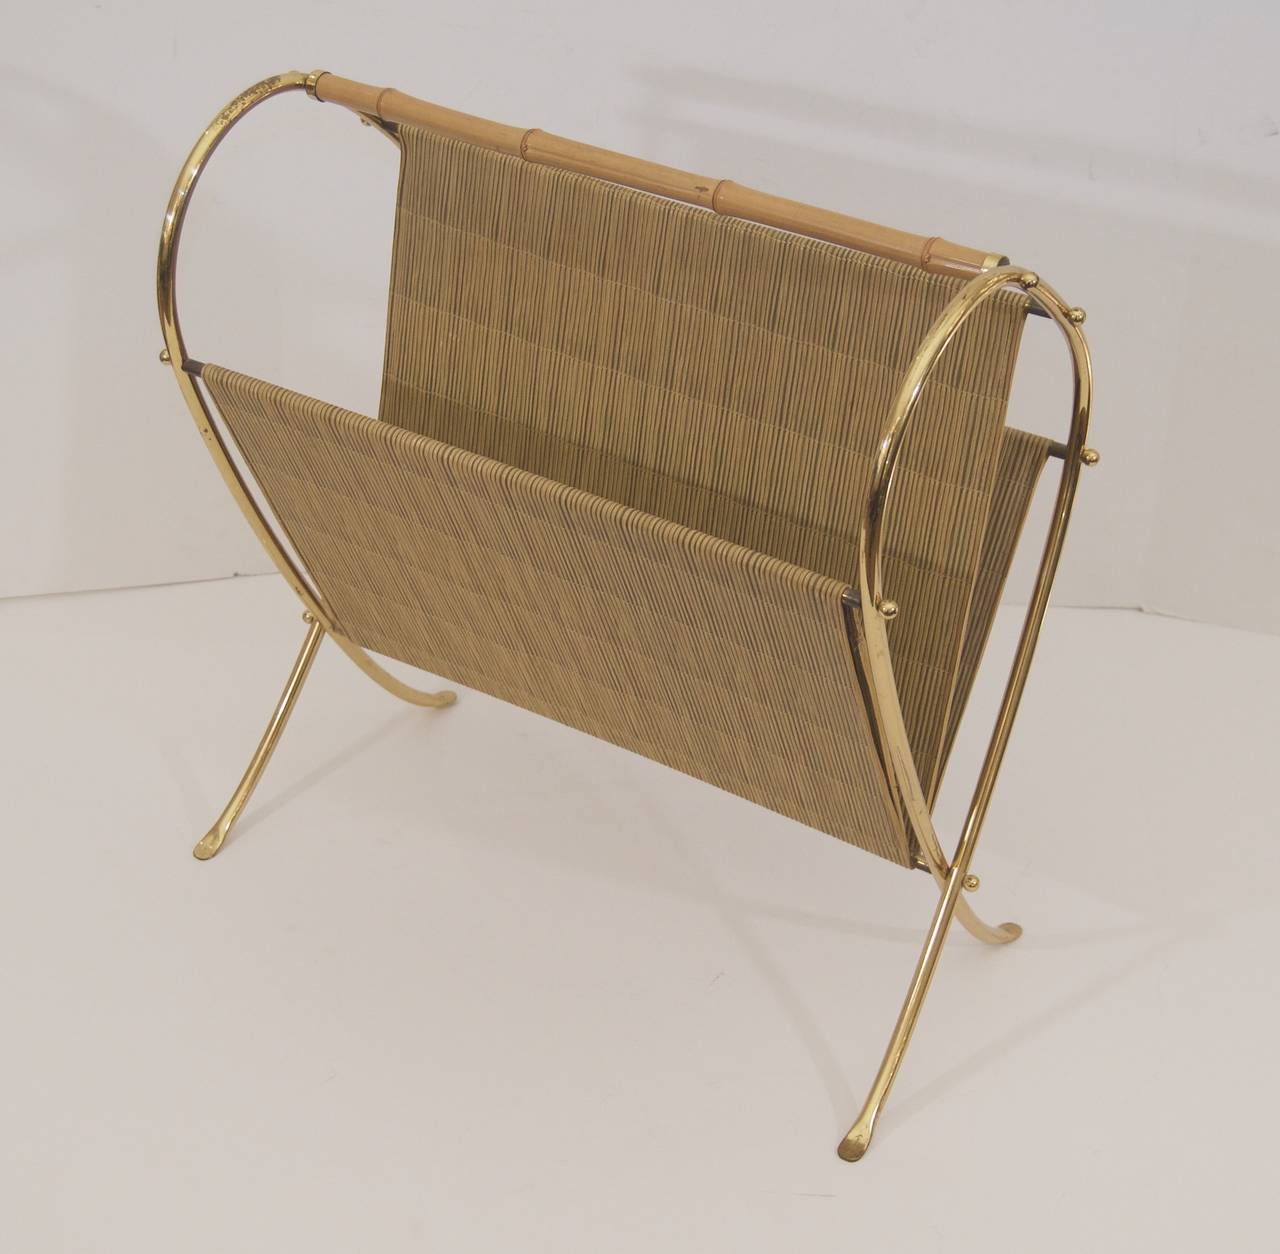 Magazine stand in brass with round ball finials and a bamboo handle. Pieces of faux bamboo wraparound the frame to create a receptacle for newspapers and books.